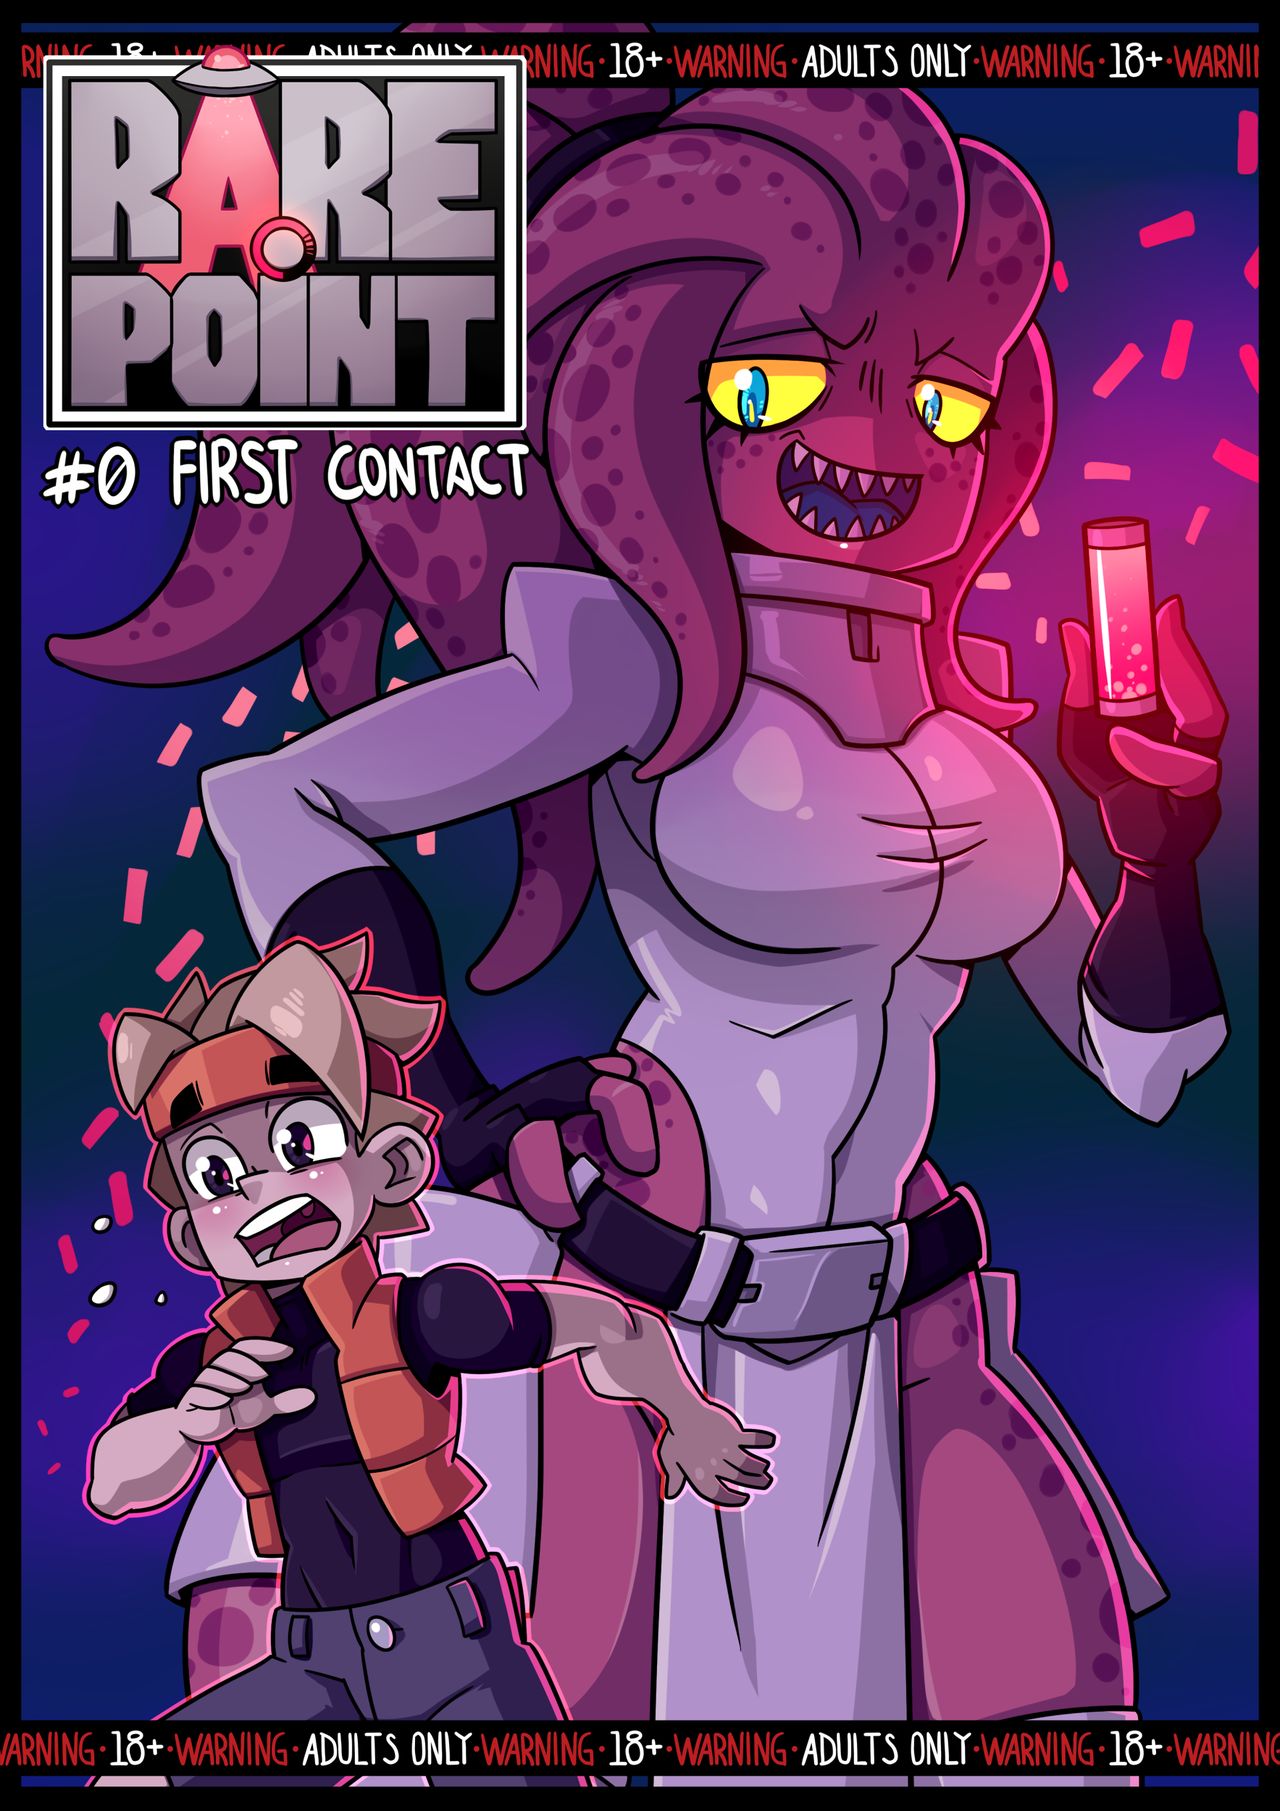 RarePoint #0: First Contact by Catunder